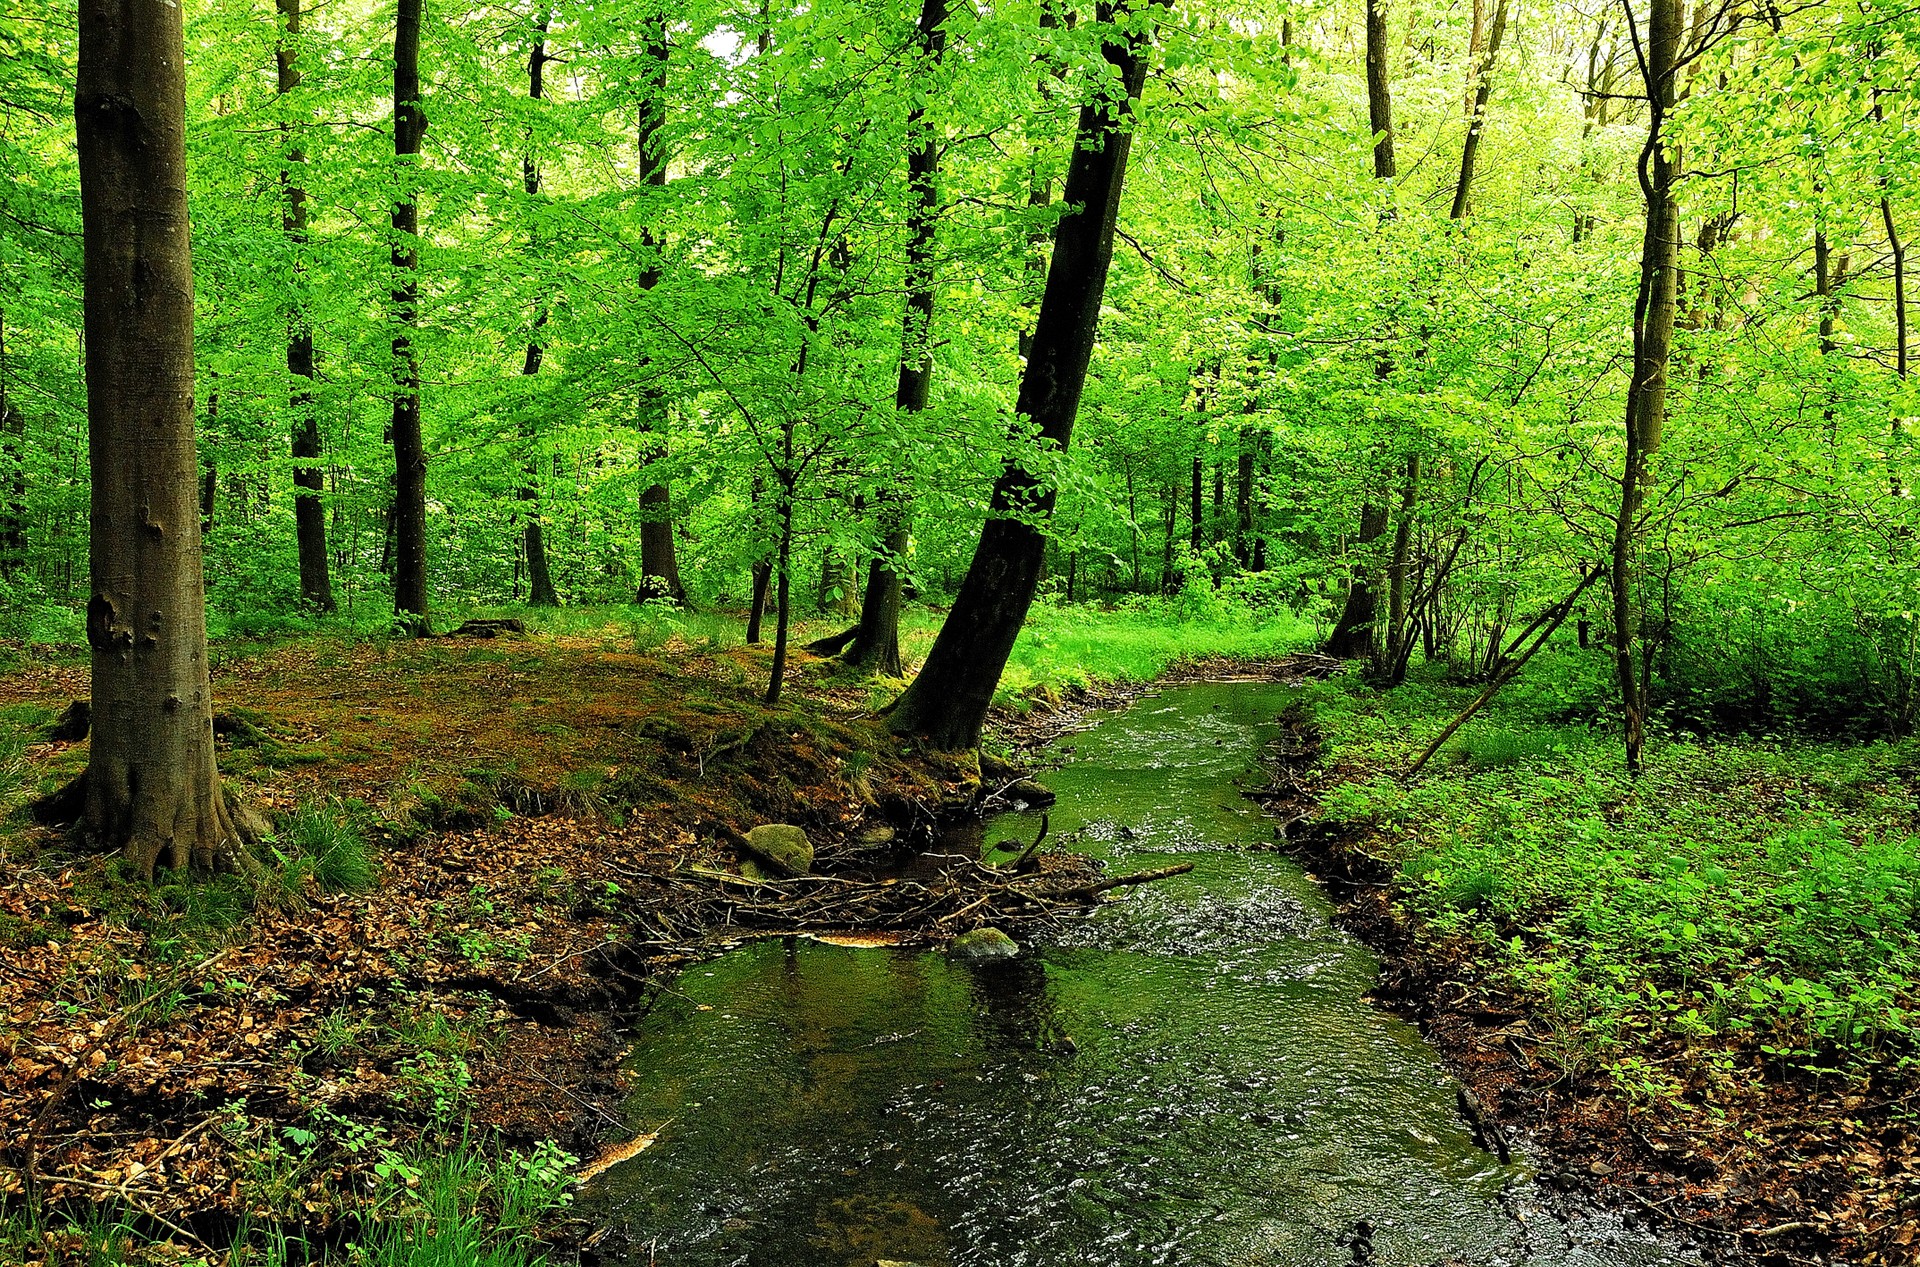 General 1920x1267 trees creeks forest wilderness green bright nature